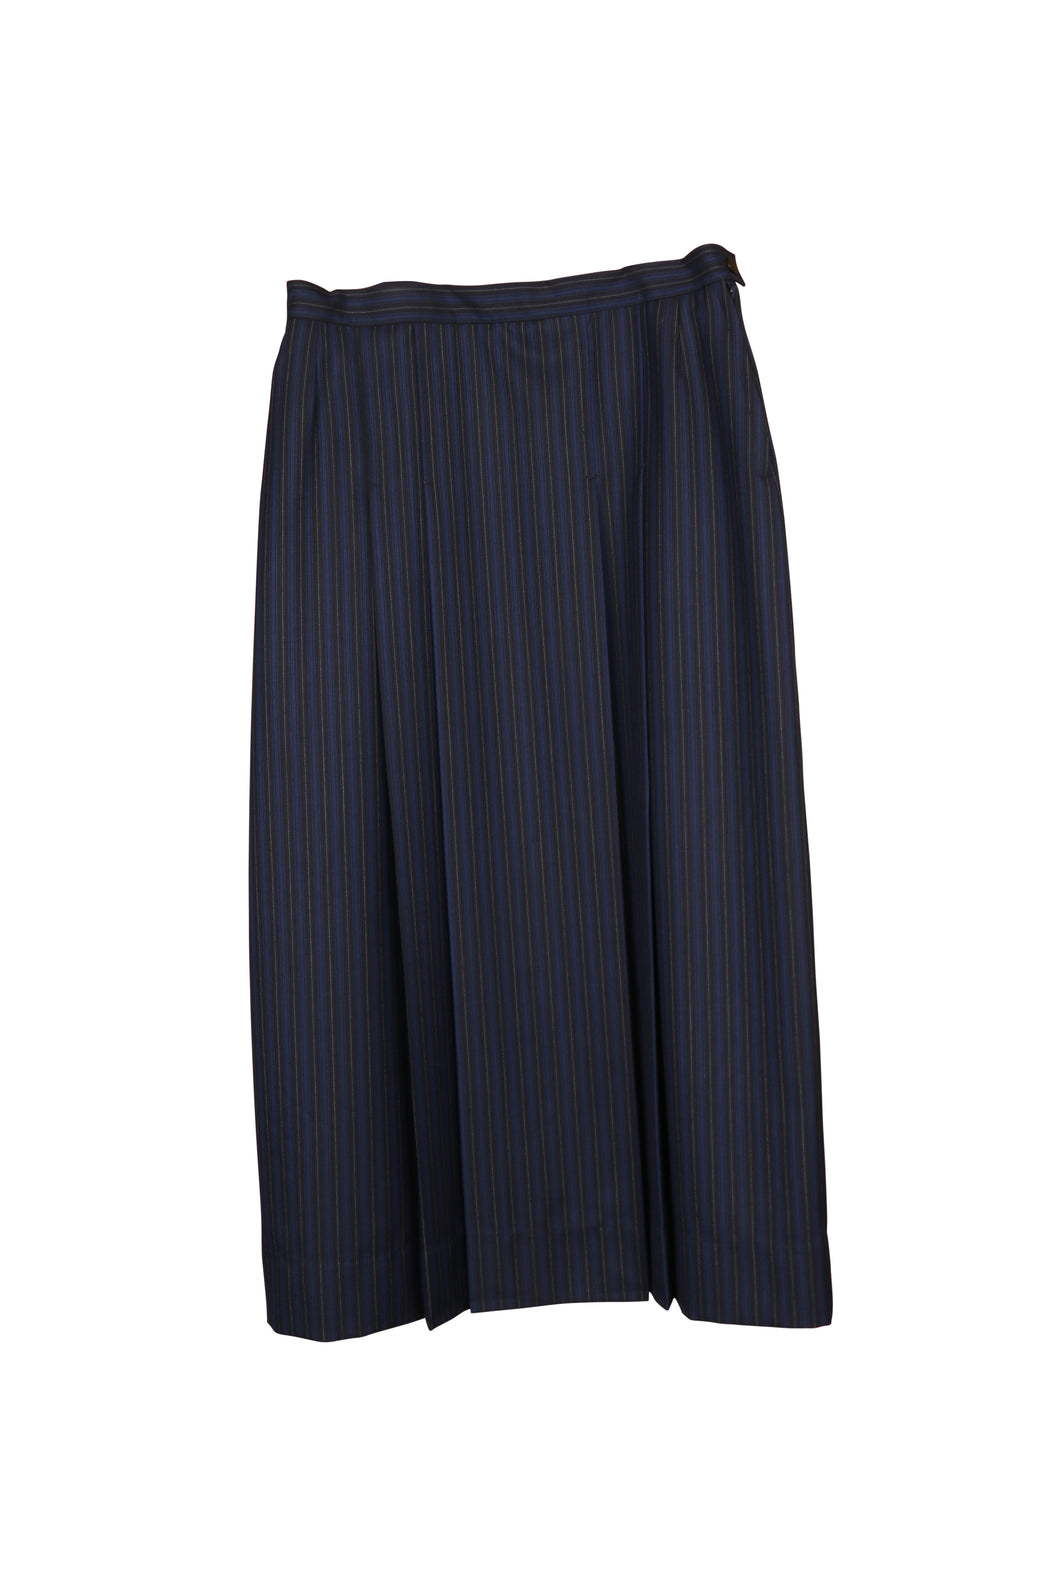 Winter/Formal Striped Poly/Wool Pleated Skirt (half-lined) (SKC)